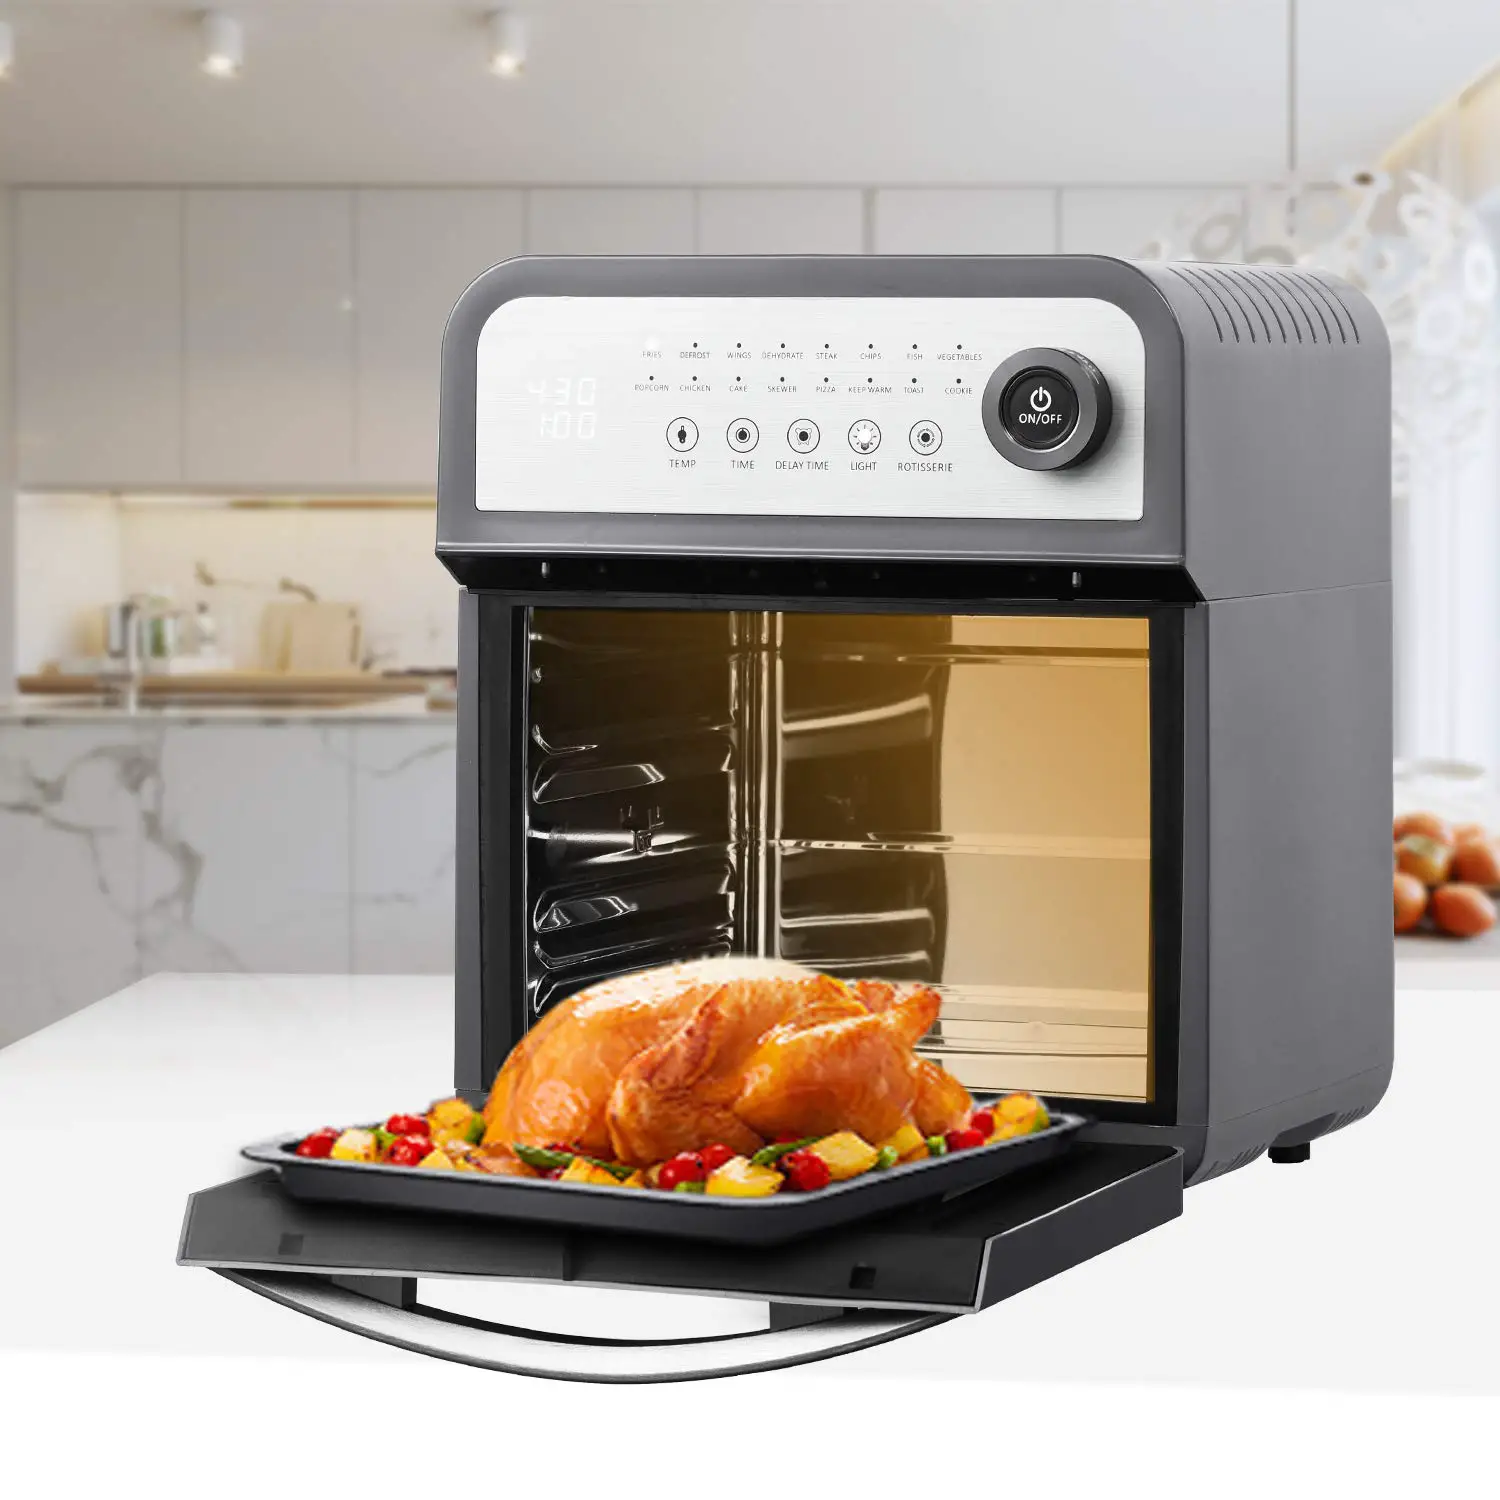 Amazon.com: Geek Chef Air Fryer Oven 12 Quart Large Capacity with ...